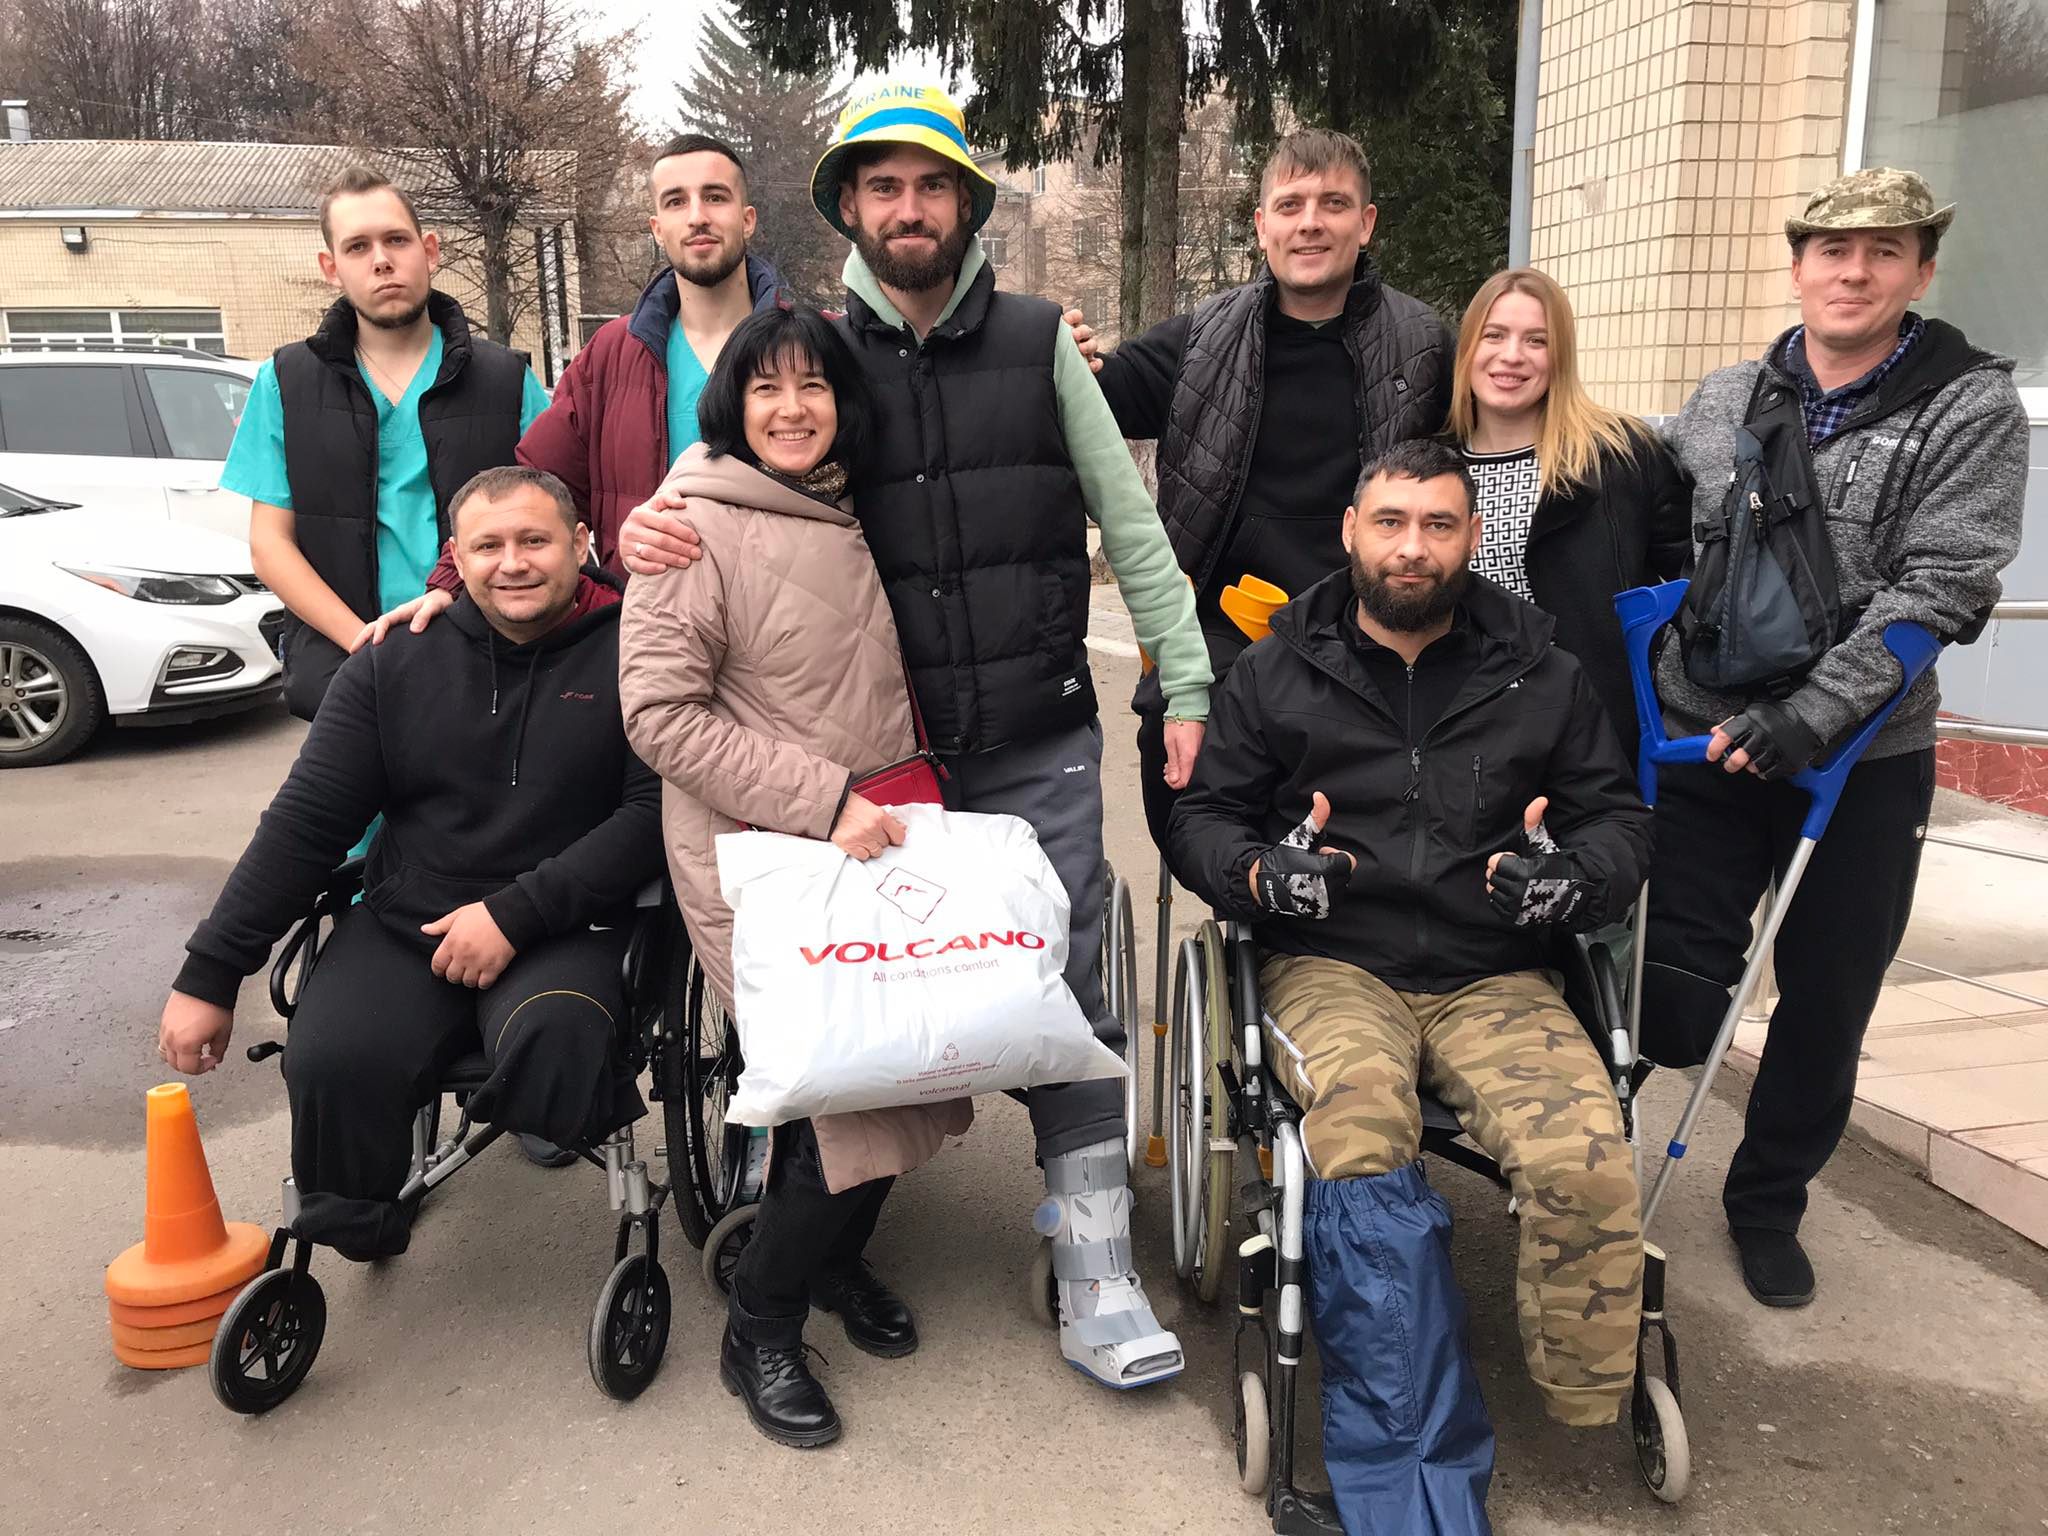 The Vinnytsia Institute for Disability and Rehabilitation Research and Maple Hope